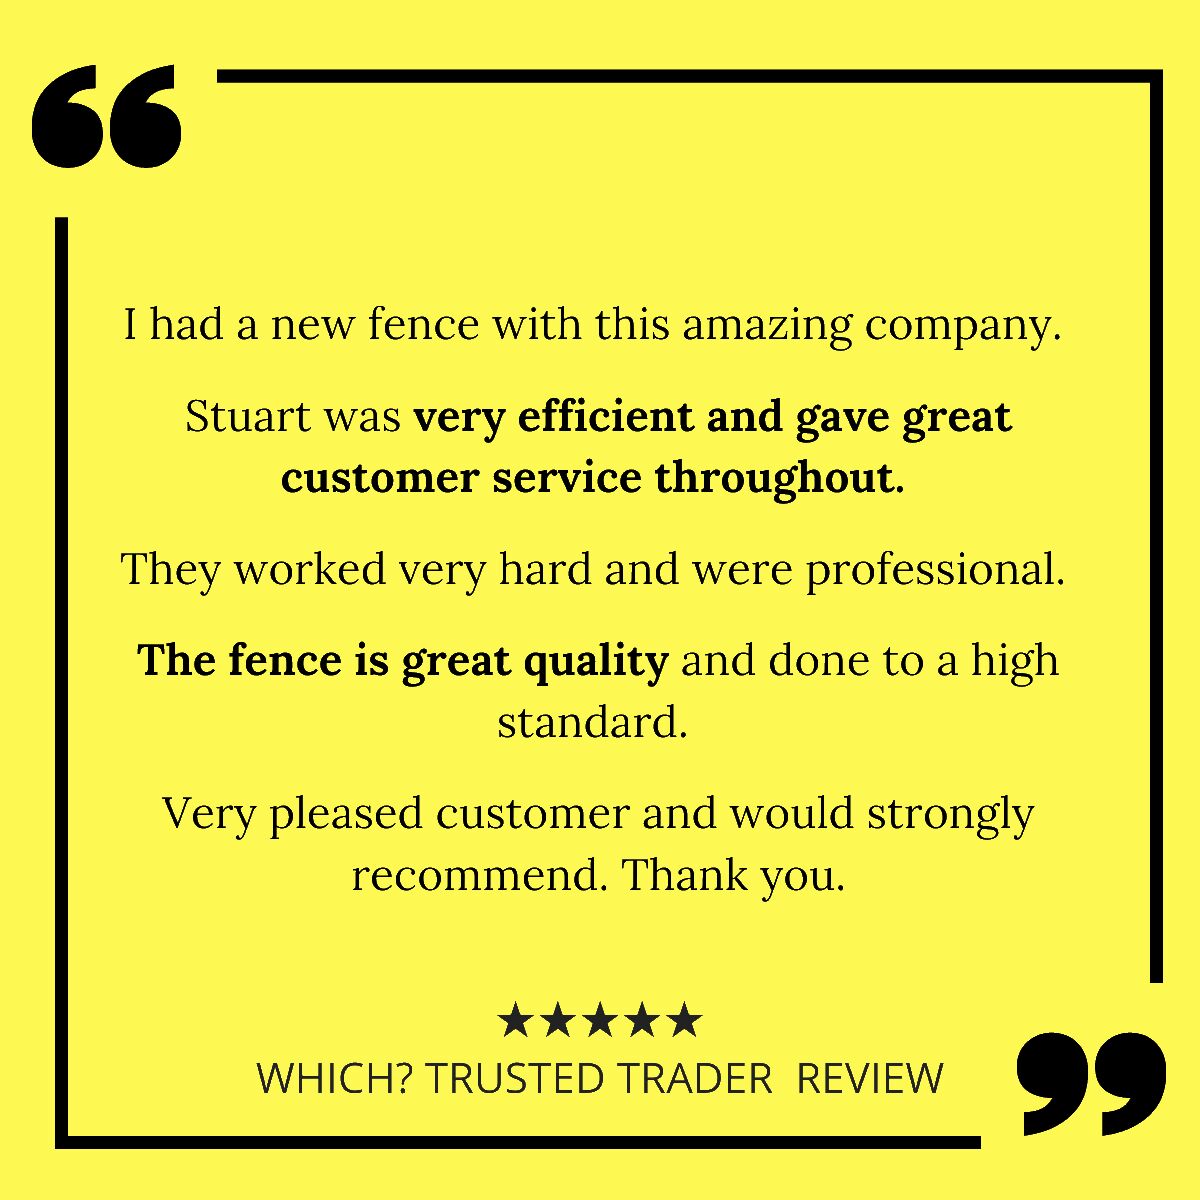 Customer review, left on Which? Trusted Trader

Customer Service ⭐⭐⭐⭐⭐
Quality ⭐⭐⭐⭐⭐ 
Value ⭐⭐⭐⭐⭐ 

#fencingcontractor #fencingcontractors #domesticfencing #commercialfencing #southlondonfencing #purley #dulwich #whichtrustedtrader #customerreview #fivestarreview